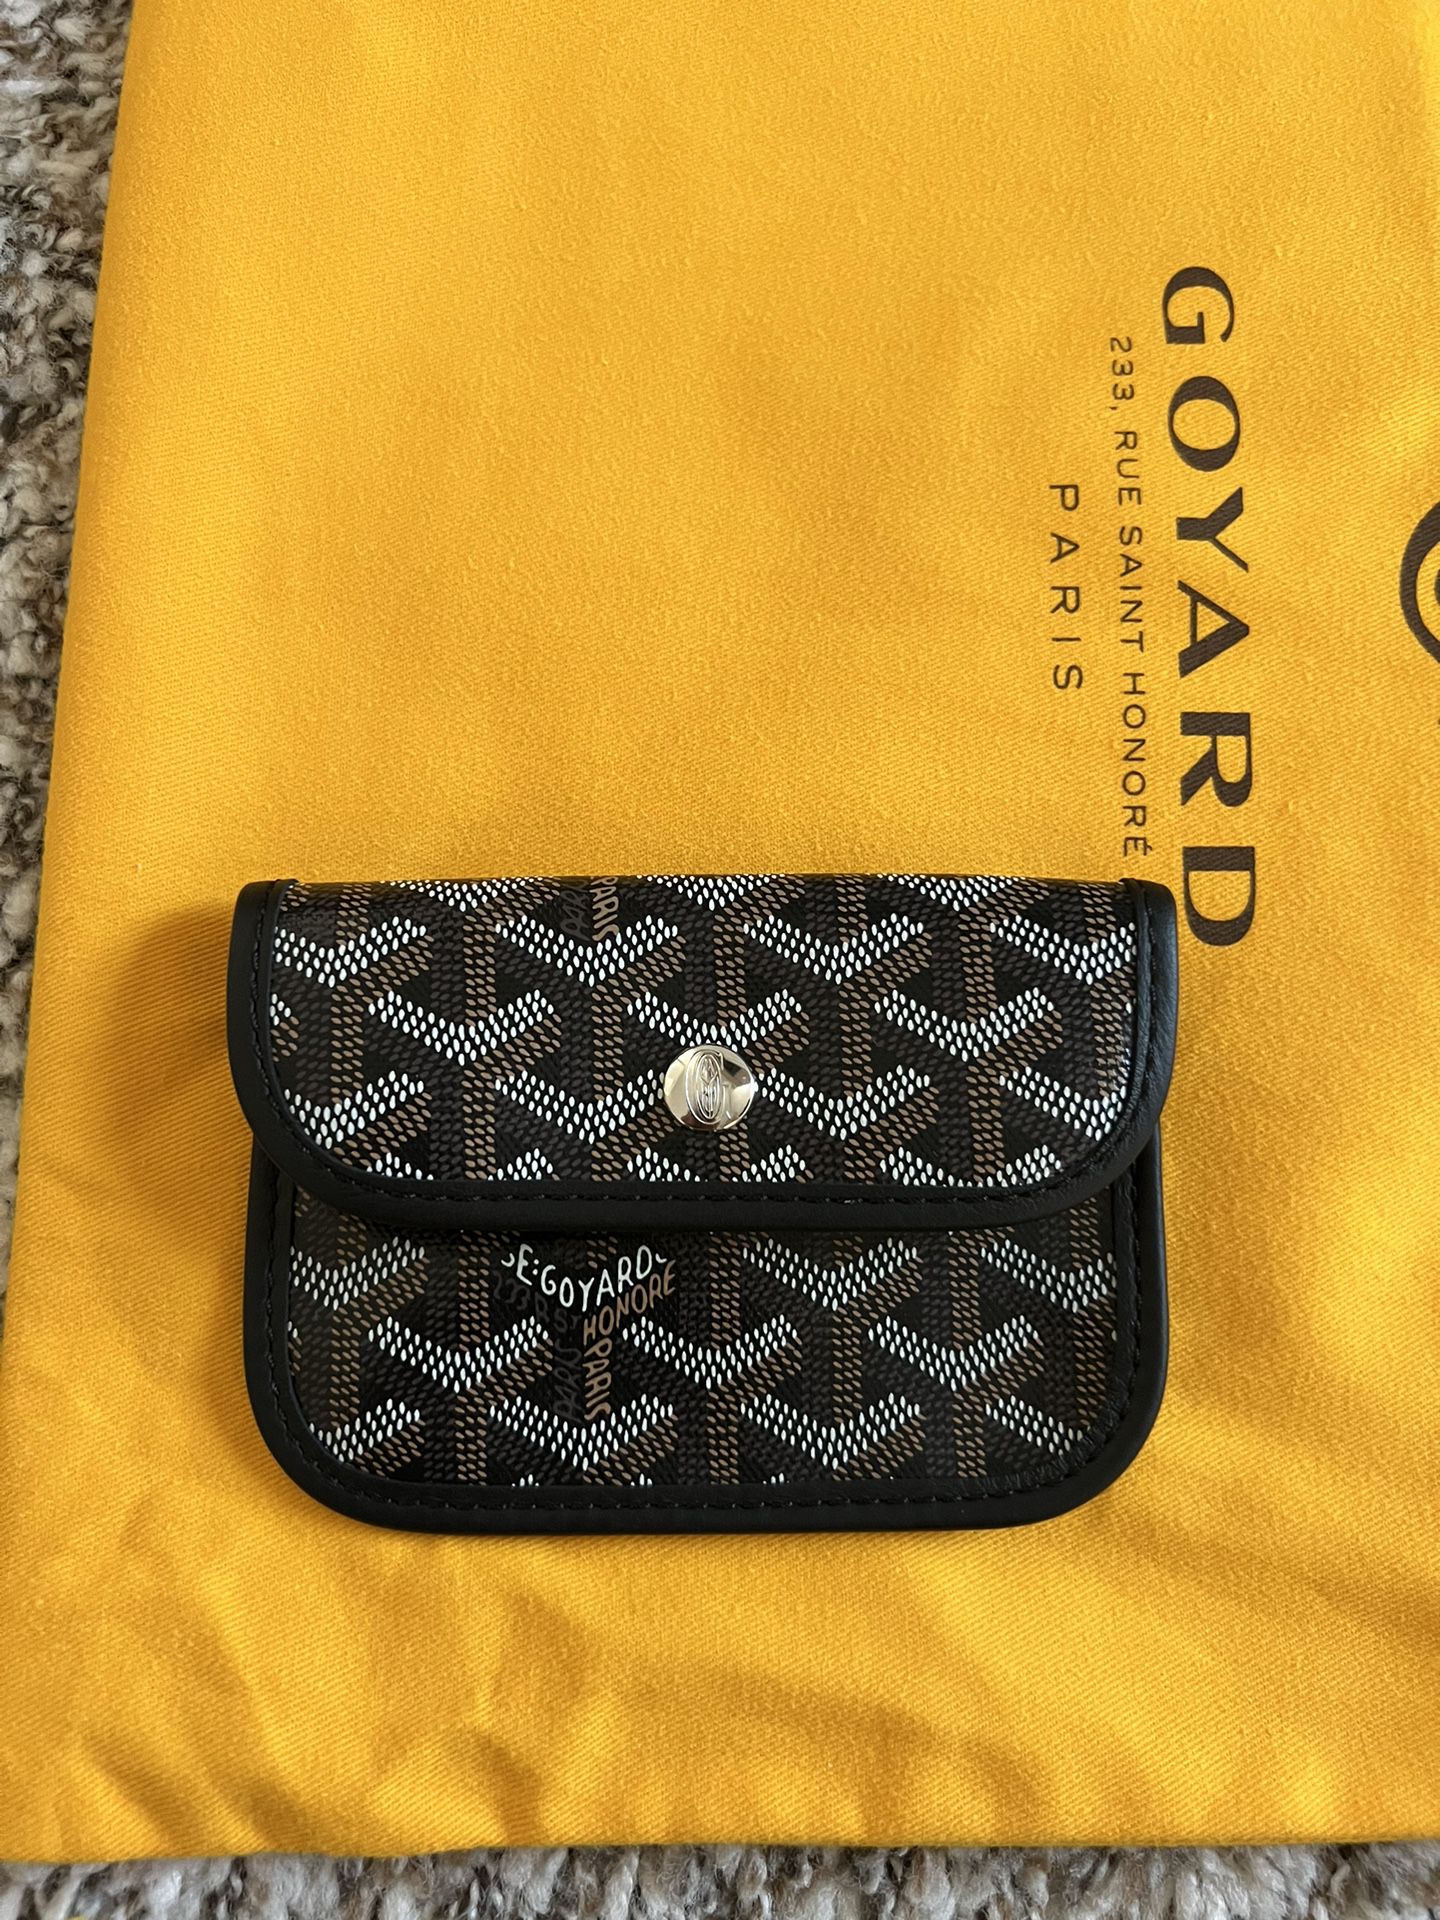 BRAND NEW SMALL POUCH WITH RECEIPT 